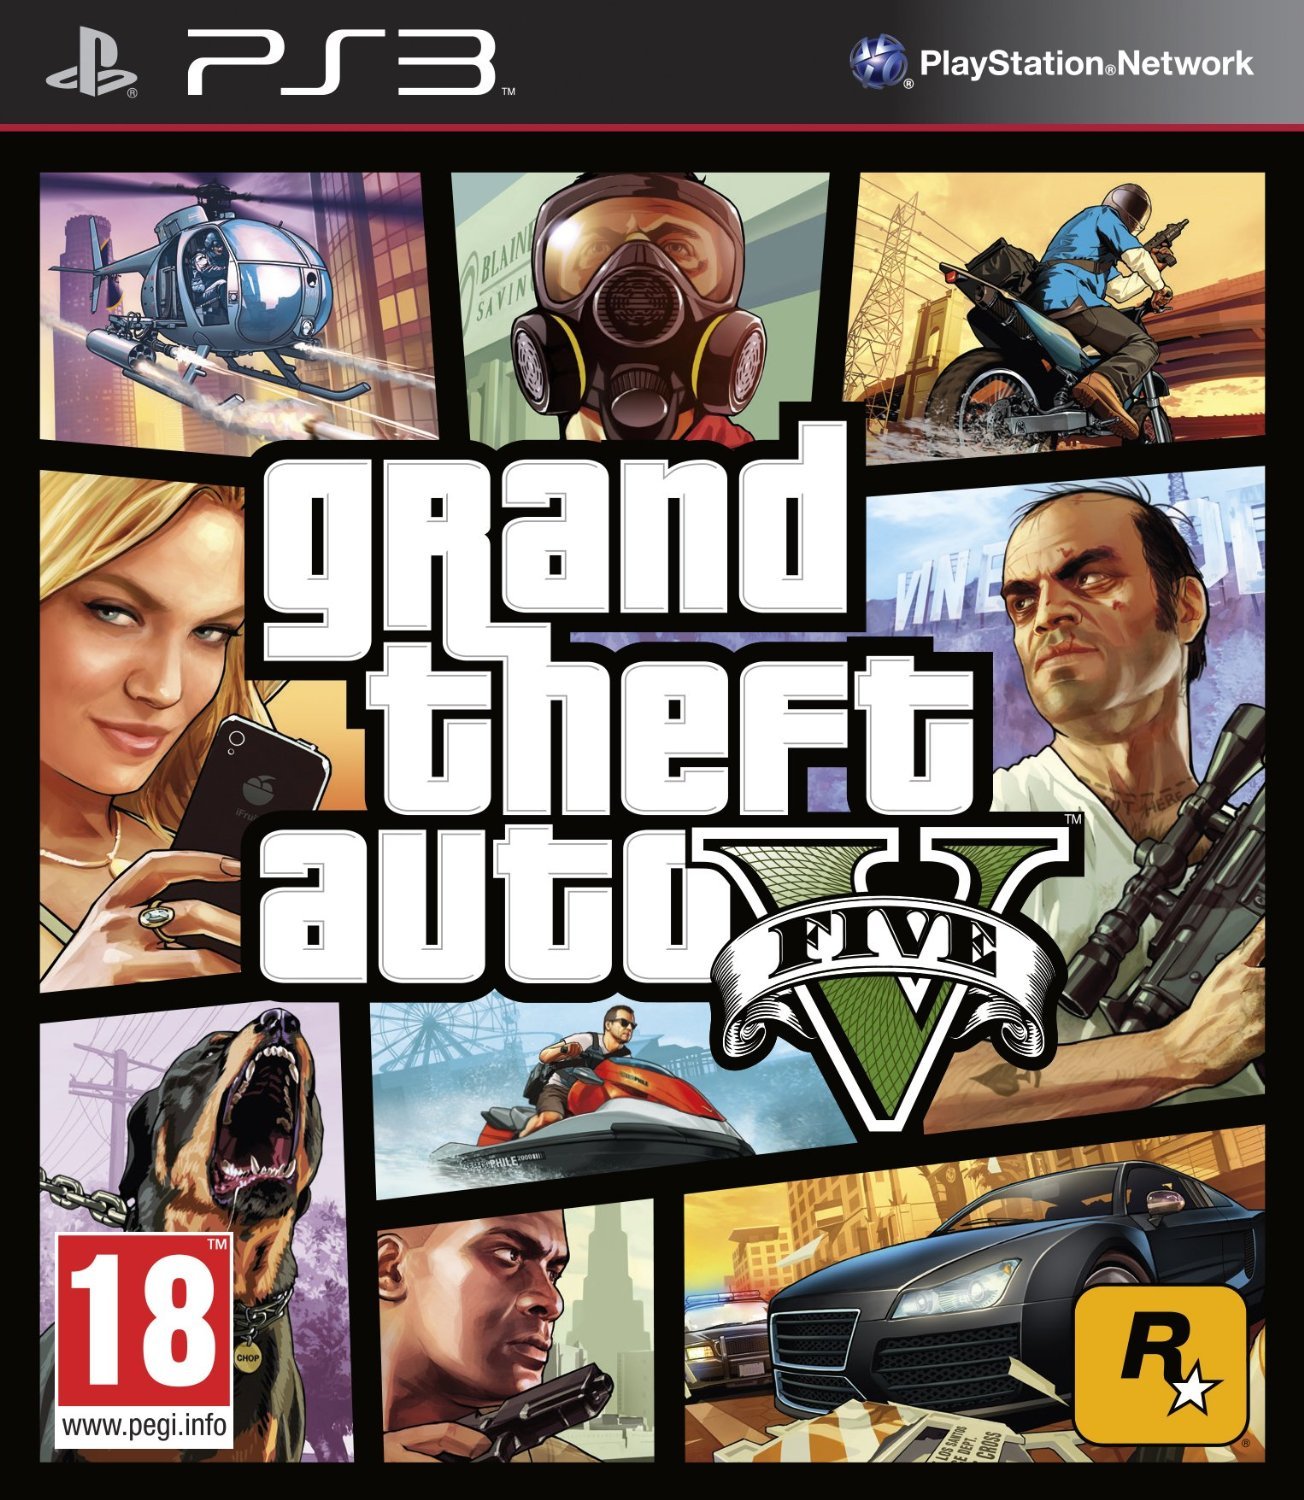 Grand Theft Auto V - PlayStation 3 - image 2 of 5